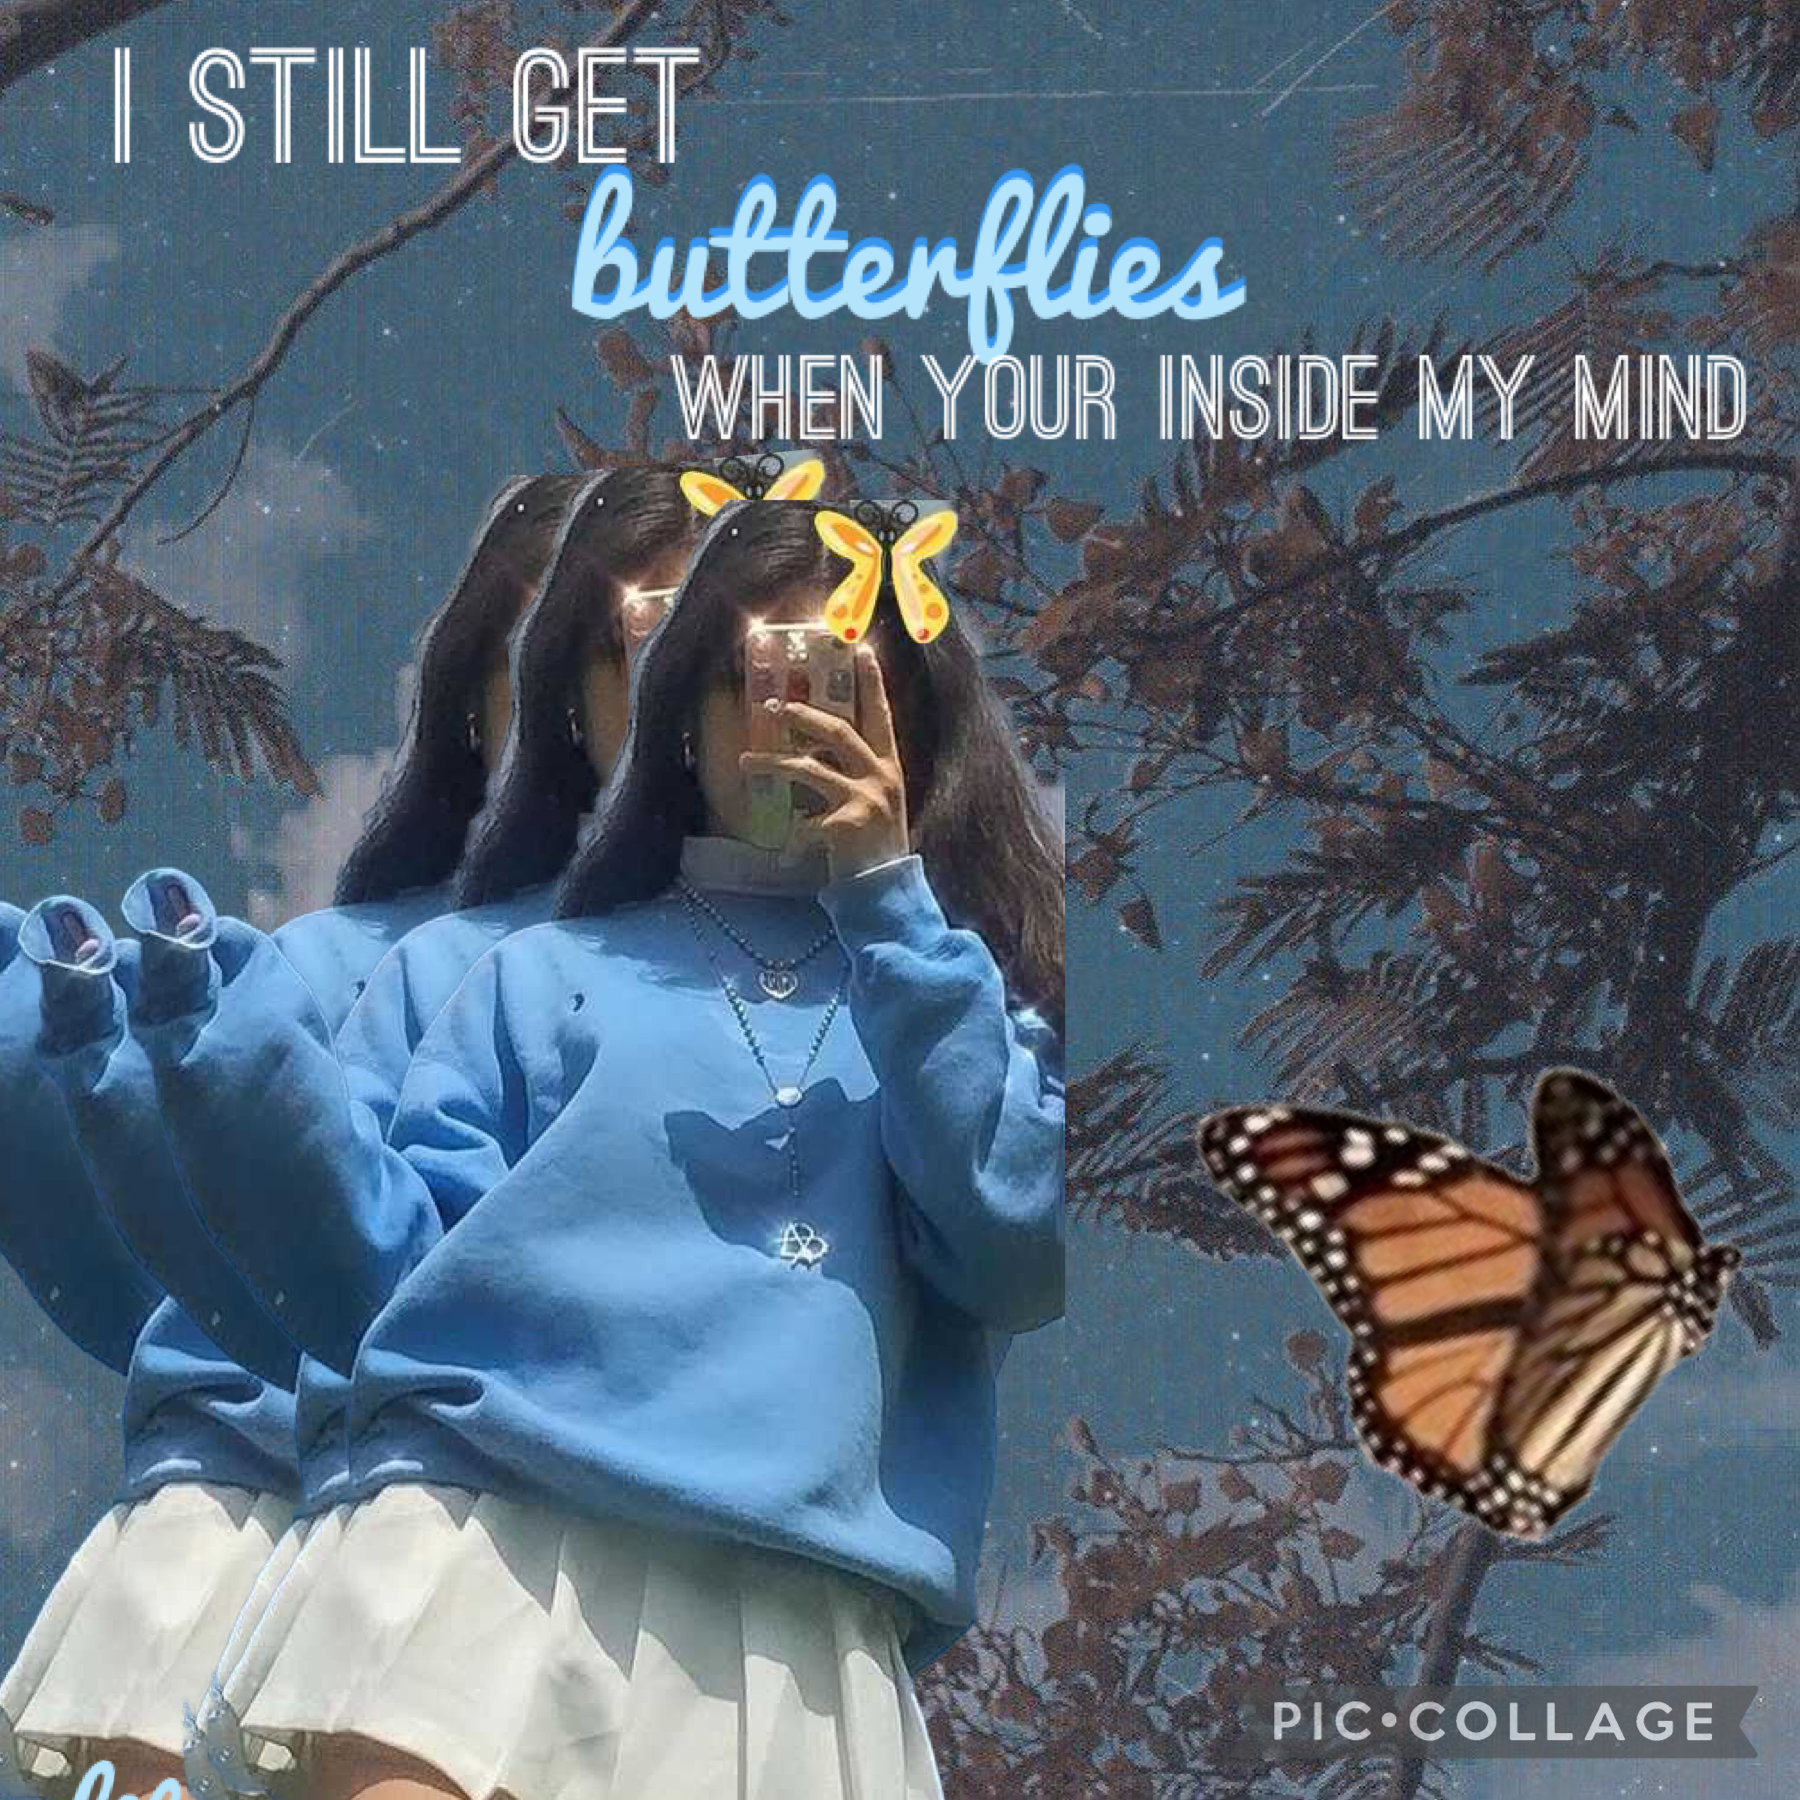 🦋t a p🦋
thanks to everyone who’s welcomed me on piccollage!! i really appreciate it x
{5-3-21}